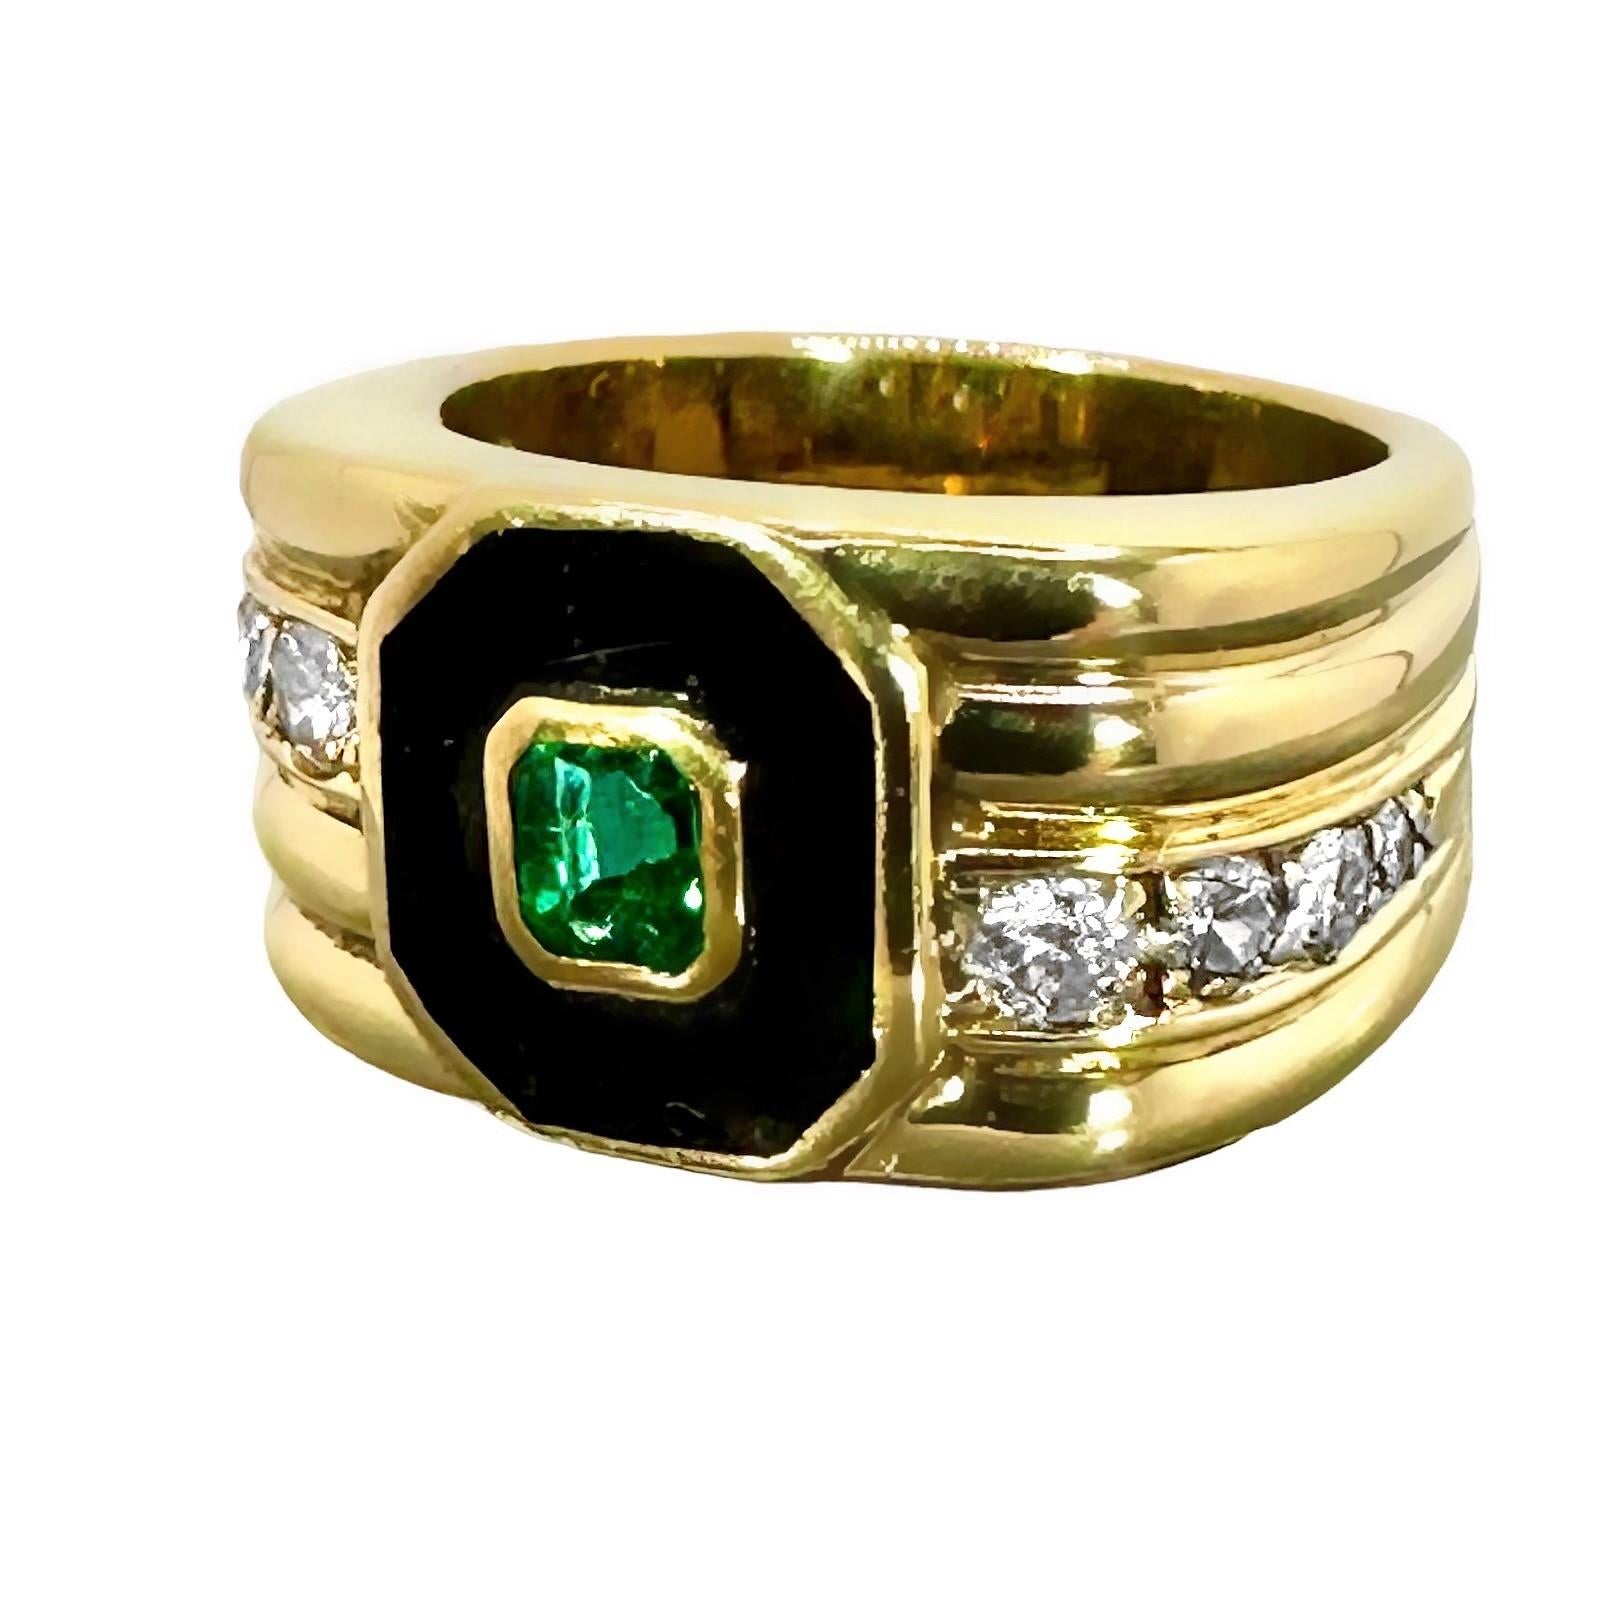 This wonderful Mid-20th Century Ladies ring has, set at it's center, one very fine quality emerald cut emerald weighing approximately .53ct. This gem is set in an octagonal field of black enamel, which presents beautifully with the contrasting